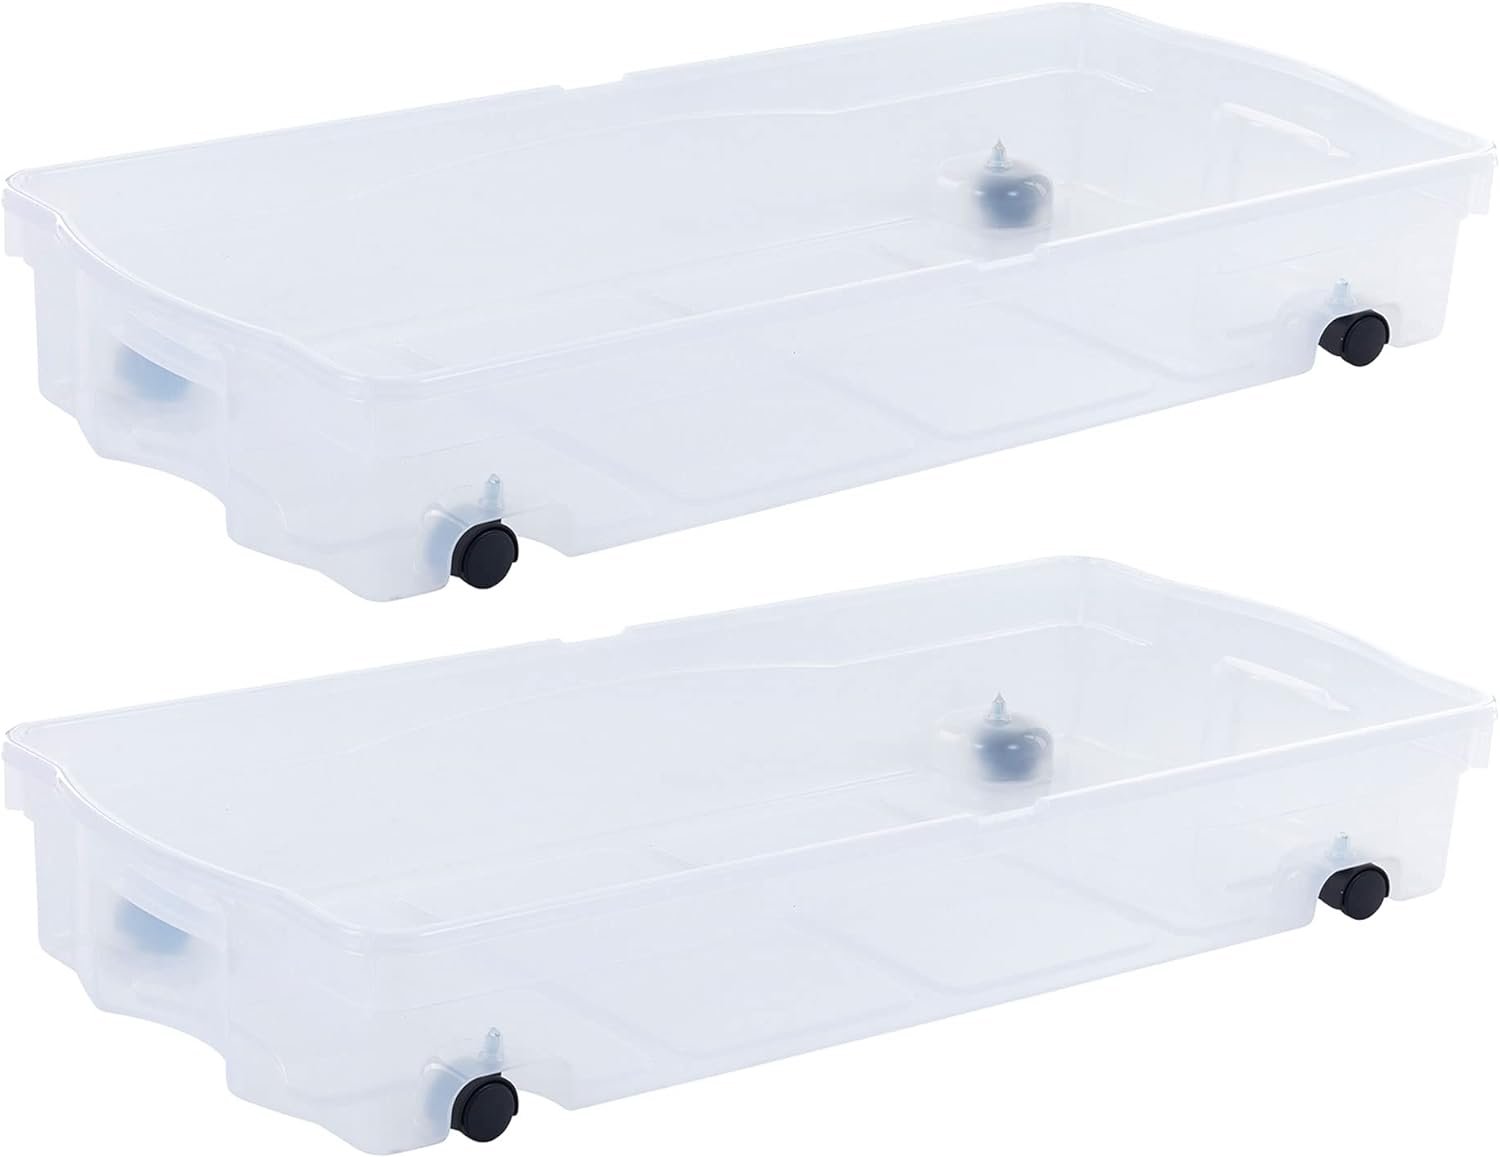 Rubbermaid 68 Quart Under the Bed Storage Box Review